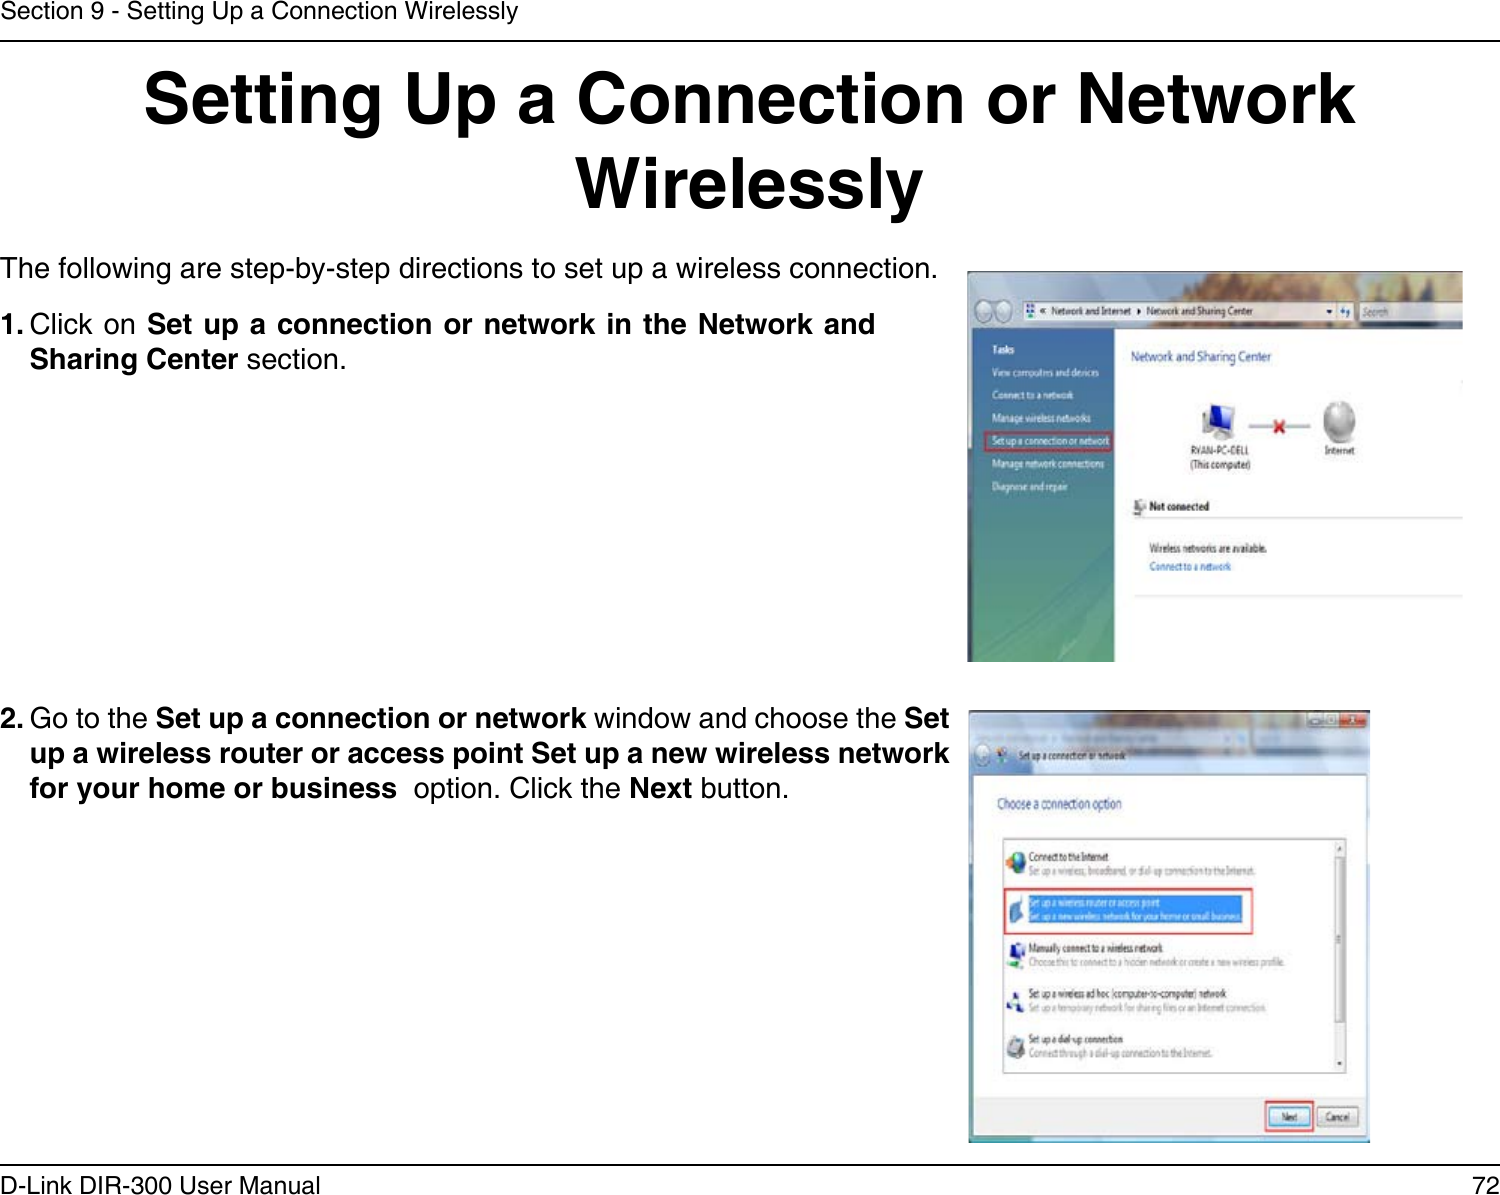 72D-Link DIR-300 User ManualSection 9 - Setting Up a Connection WirelesslySetting Up a Connection or Network WirelesslyThe following are step-by-step directions to set up a wireless connection.2. Go to the Set up a connection or network window and choose the Set up a wireless router or access point Set up a new wireless network for your home or business  option. Click the Next button. 1. Click on Set up a connection or network in the Network and Sharing Center section. 